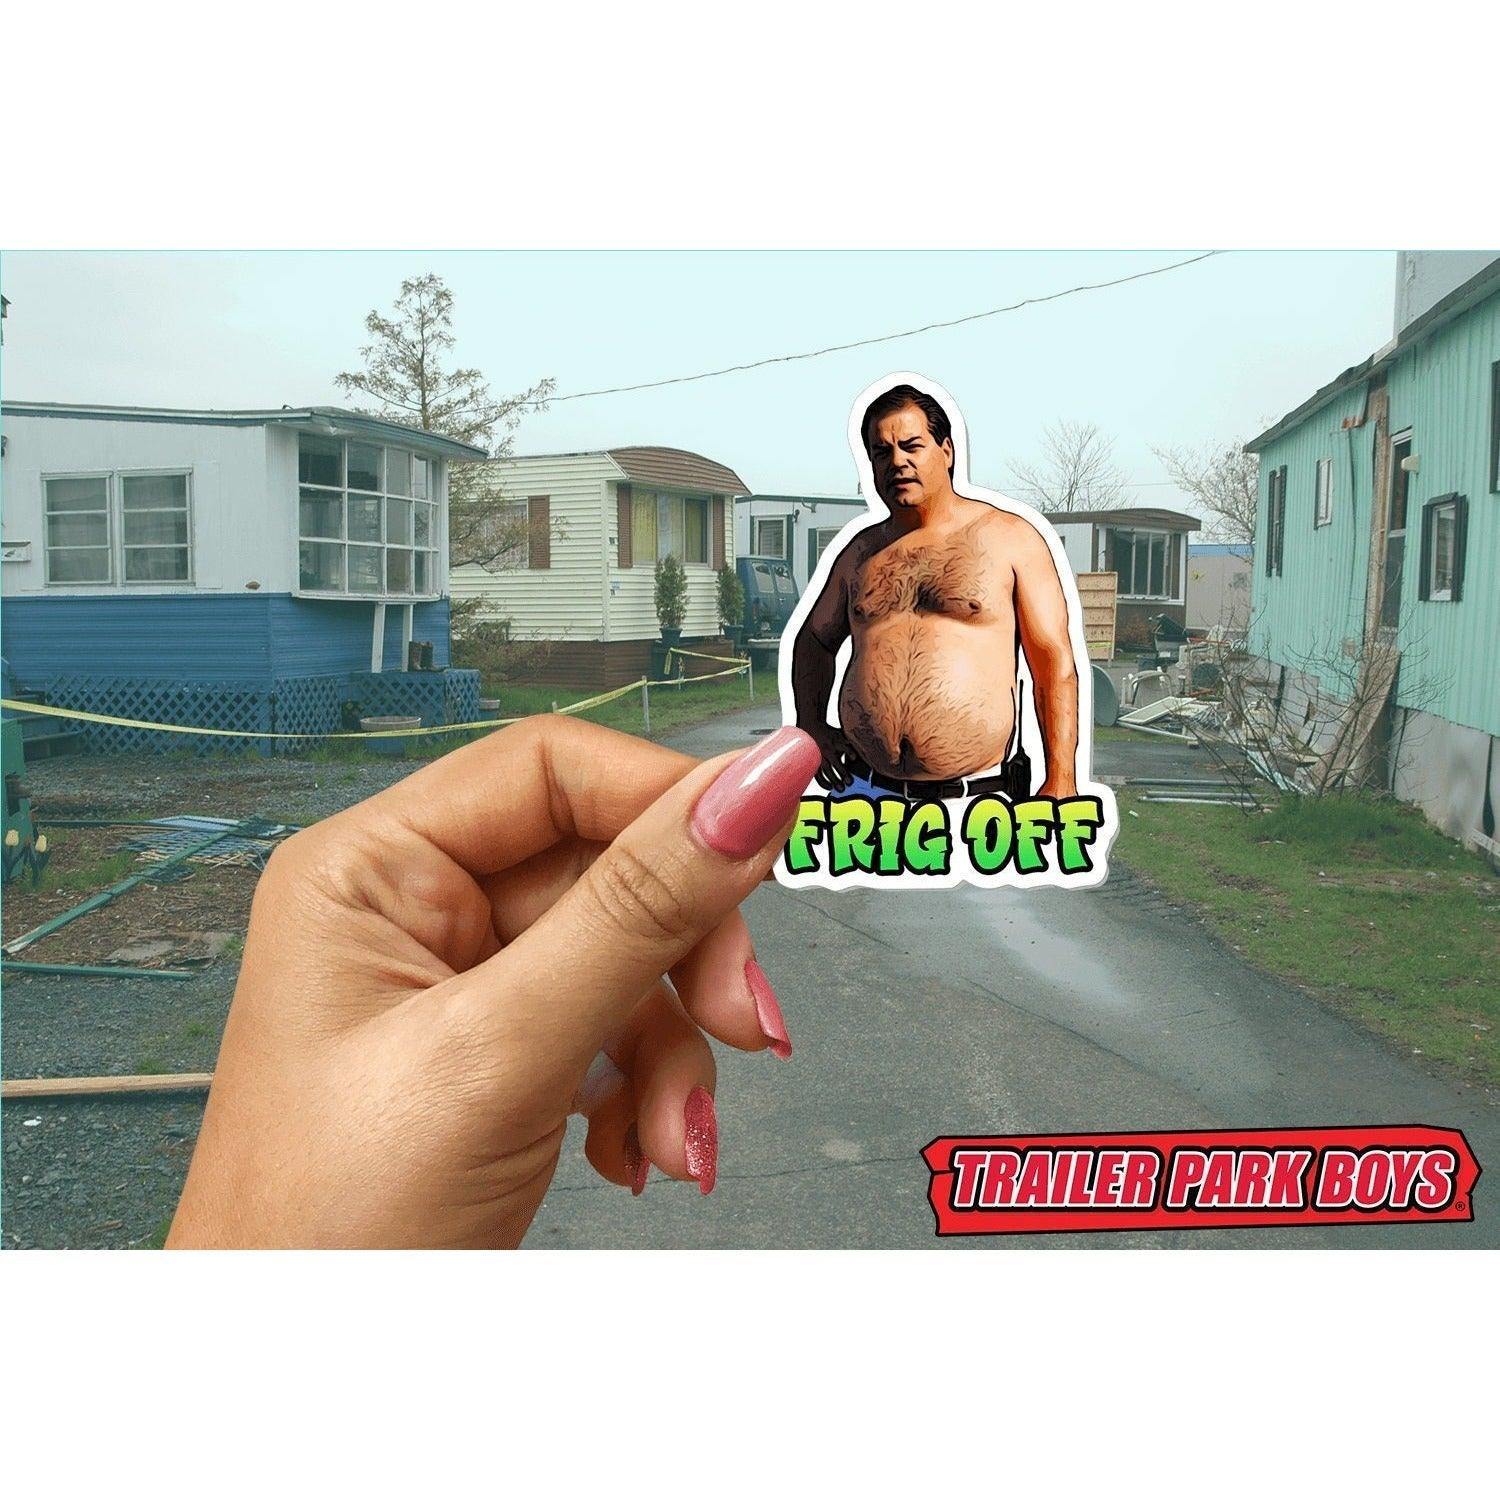 Trailer Park Boys Randy Sticker | Officially Licensed Trailer Park Boys Sticker | Randy Sticker Trailer Park Boys Merch | Stickers for Men - Ottos Grotto :: Stickers For Your Stuff